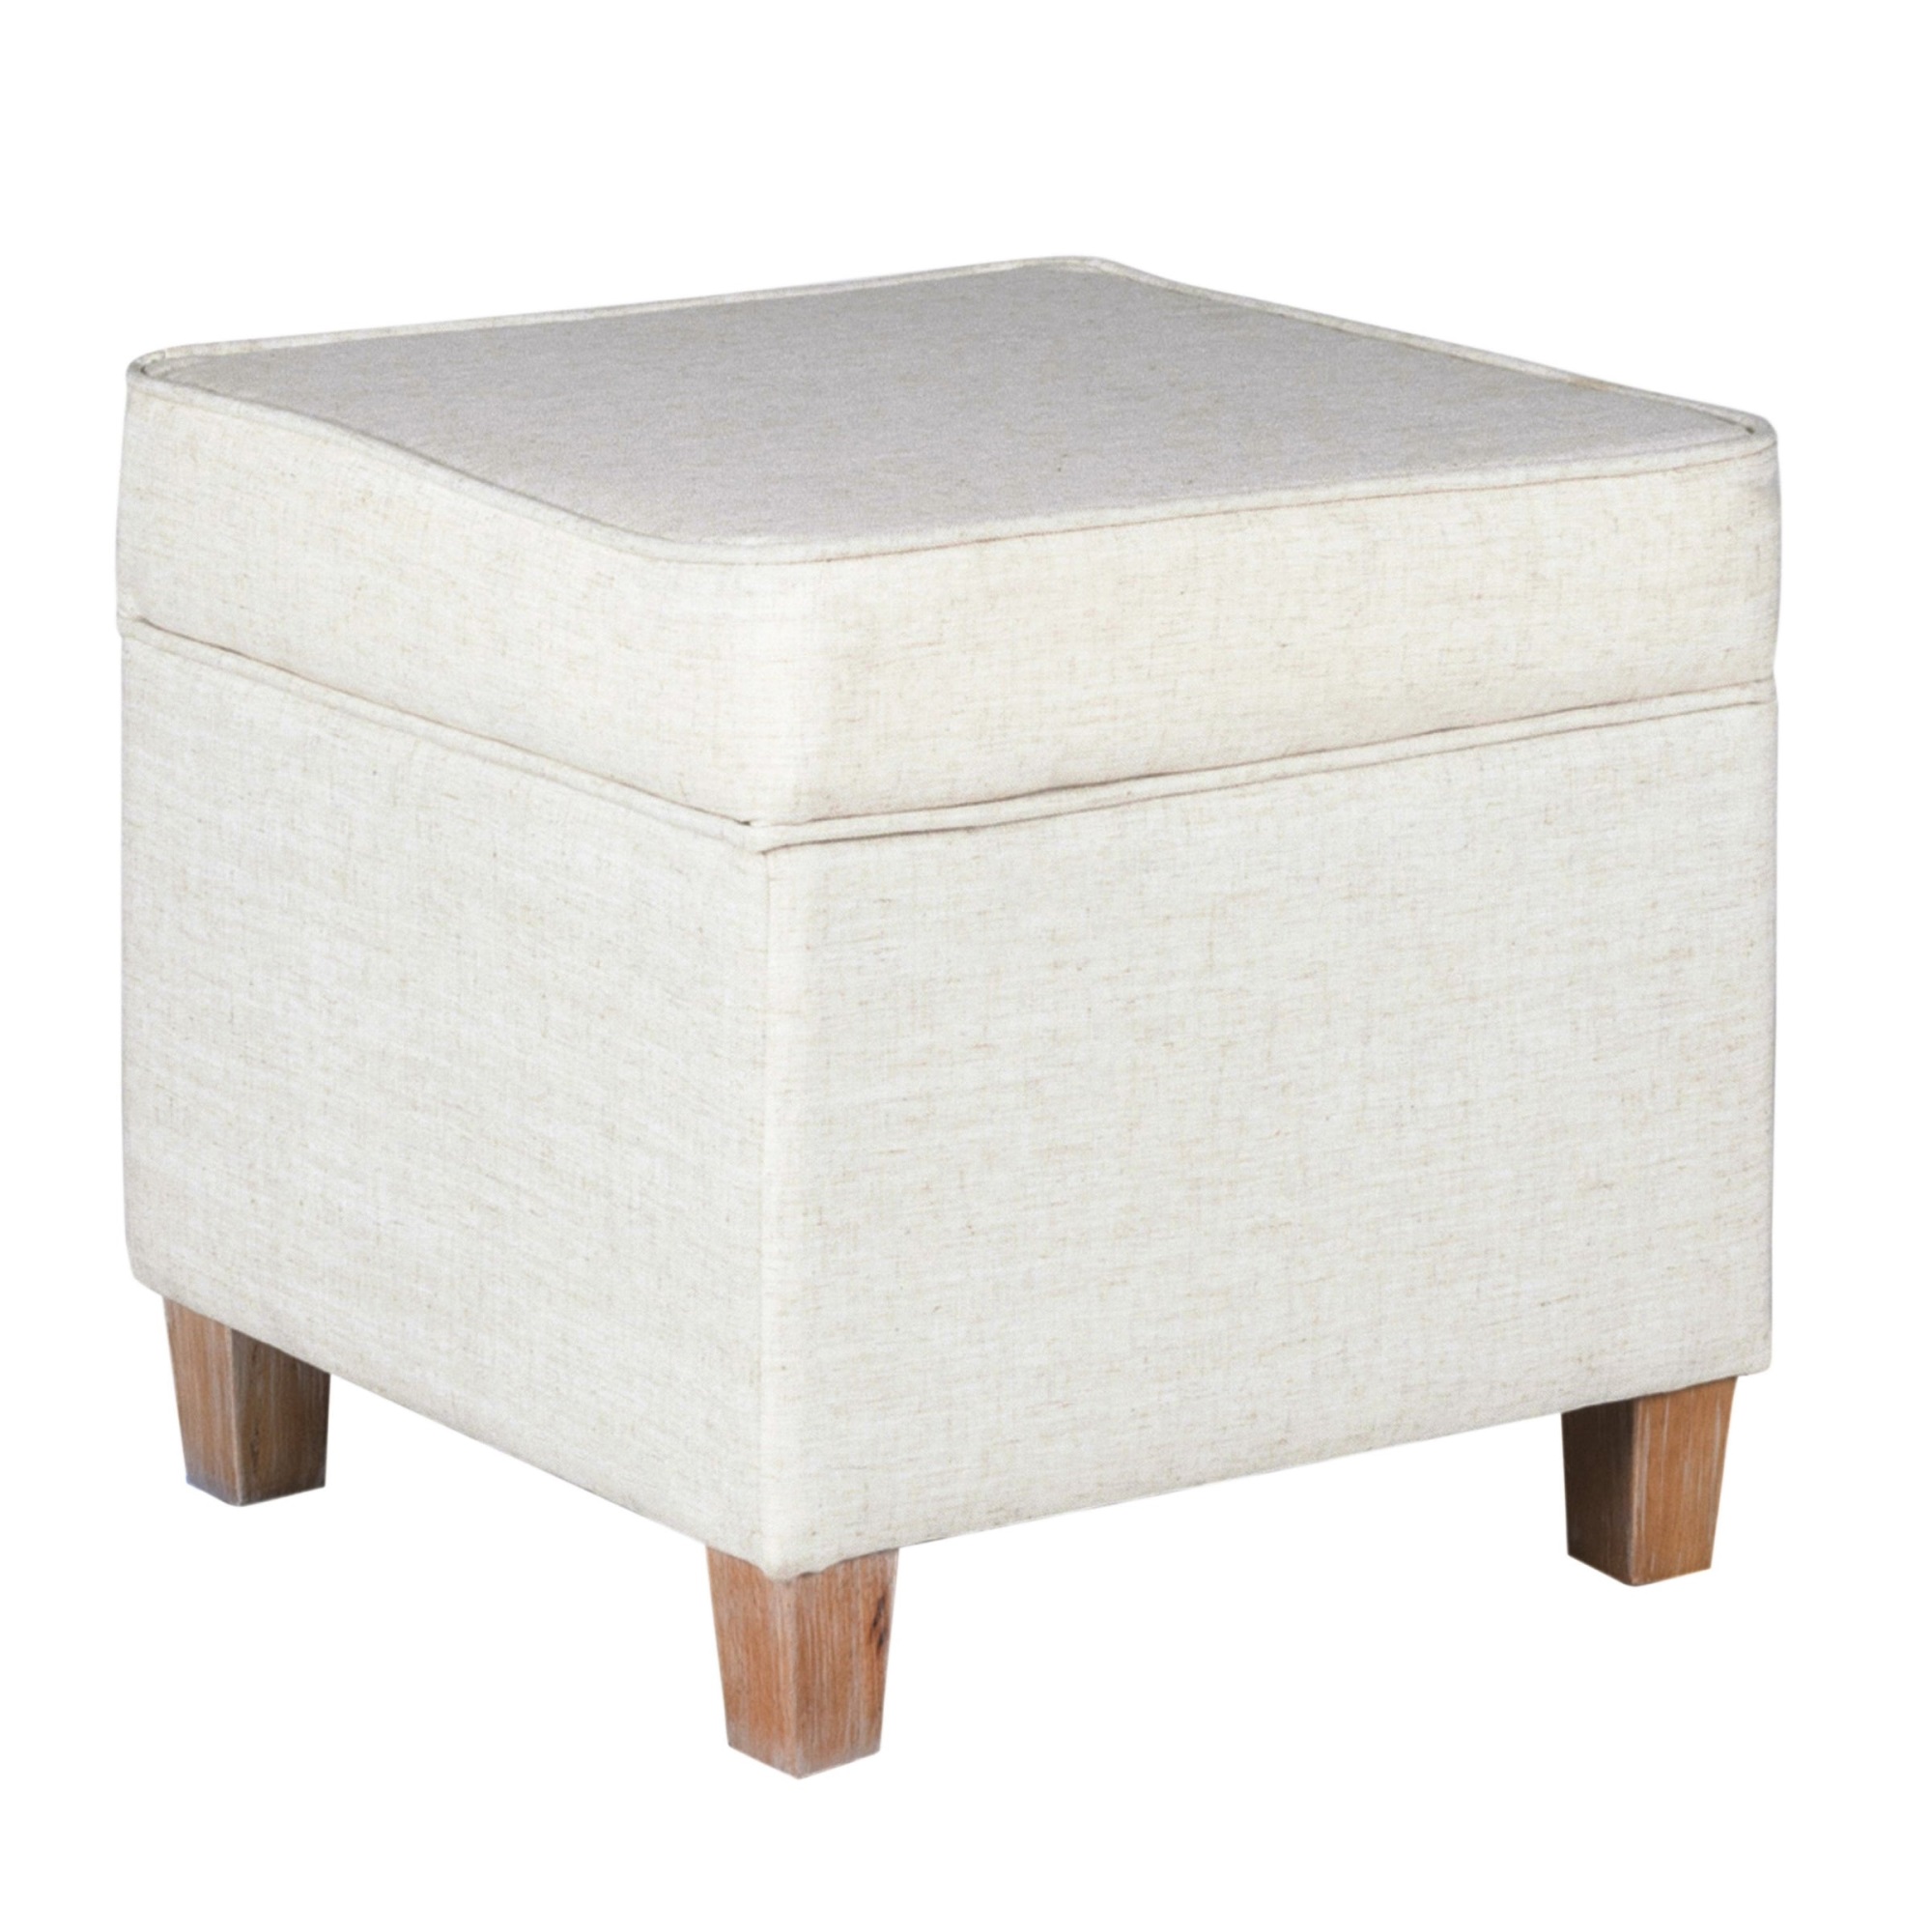 Benjara Square Shape Fabric Upholstered Ottoman with Lift Off Top and Wooden Tapered Feet, White and Brown